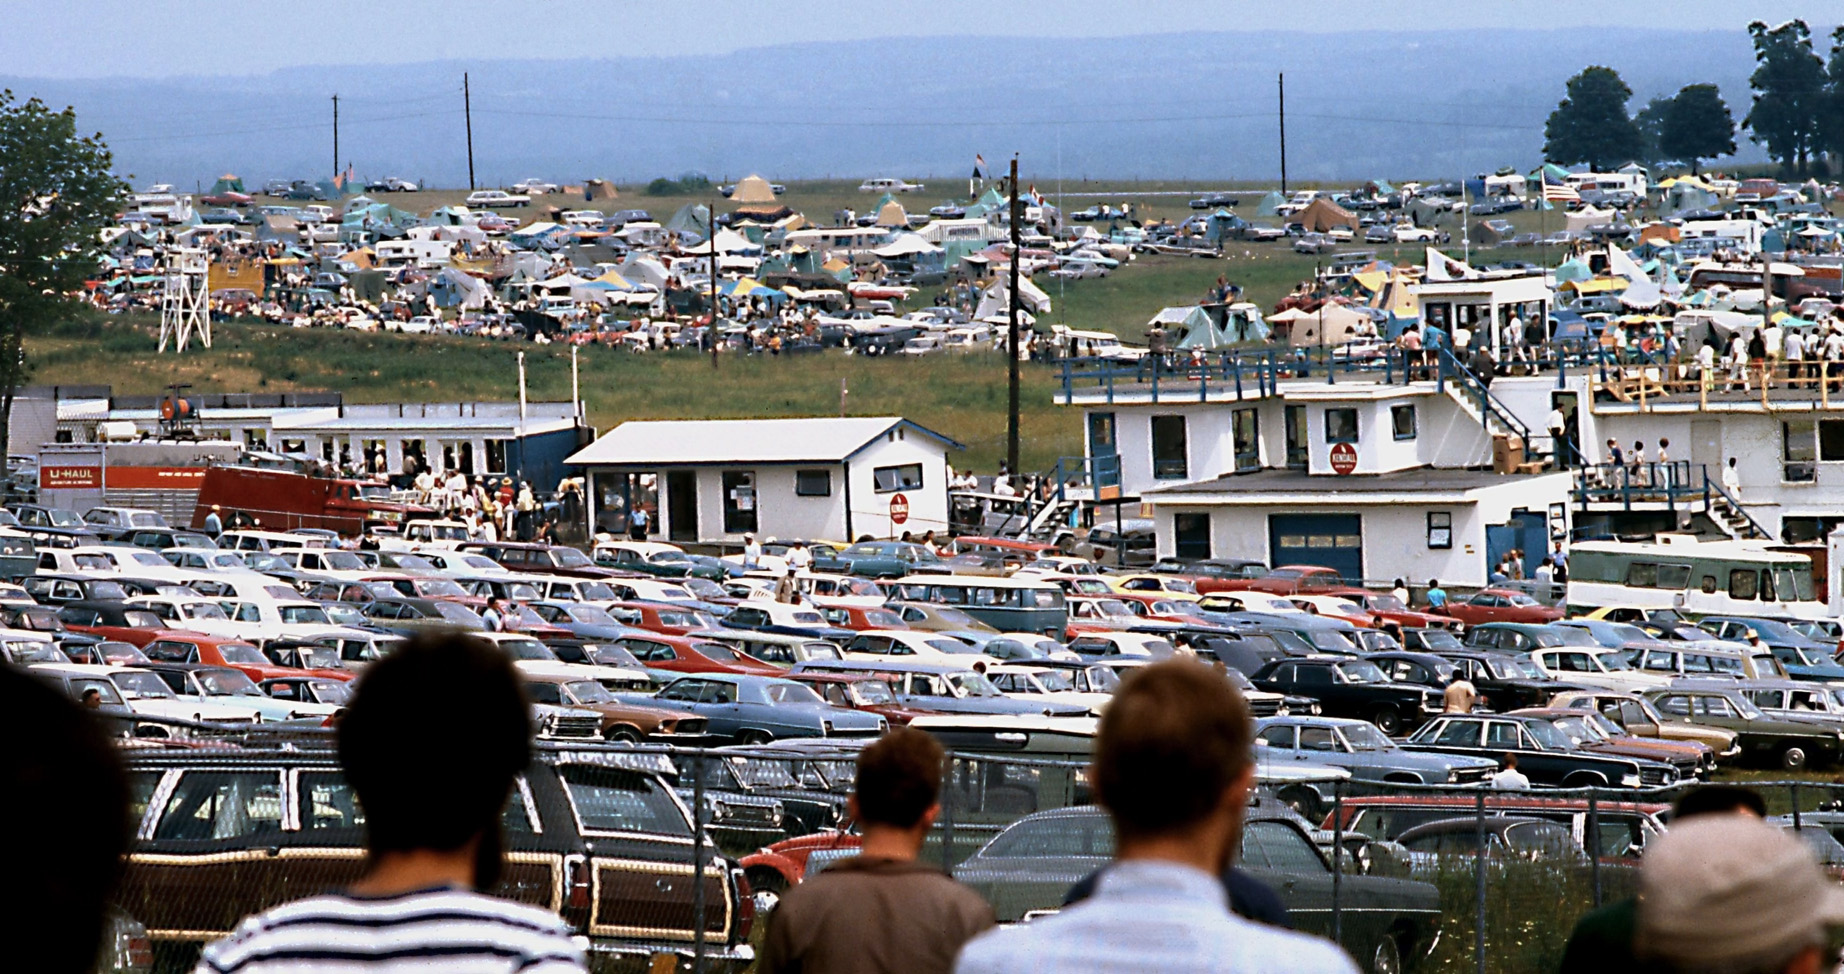 This is part of the parking paddock at Watkins Glen on CanAm weekend, 1970. Lots of American and British/European classics, all collectible today. In the background is the in-field weekend camping area, much of it tents and pickup camper caps then. Was it Watkins Glen or Mosport that the infield was known as "The Swamp" for it's "spirited" nighttime fun? View full size.